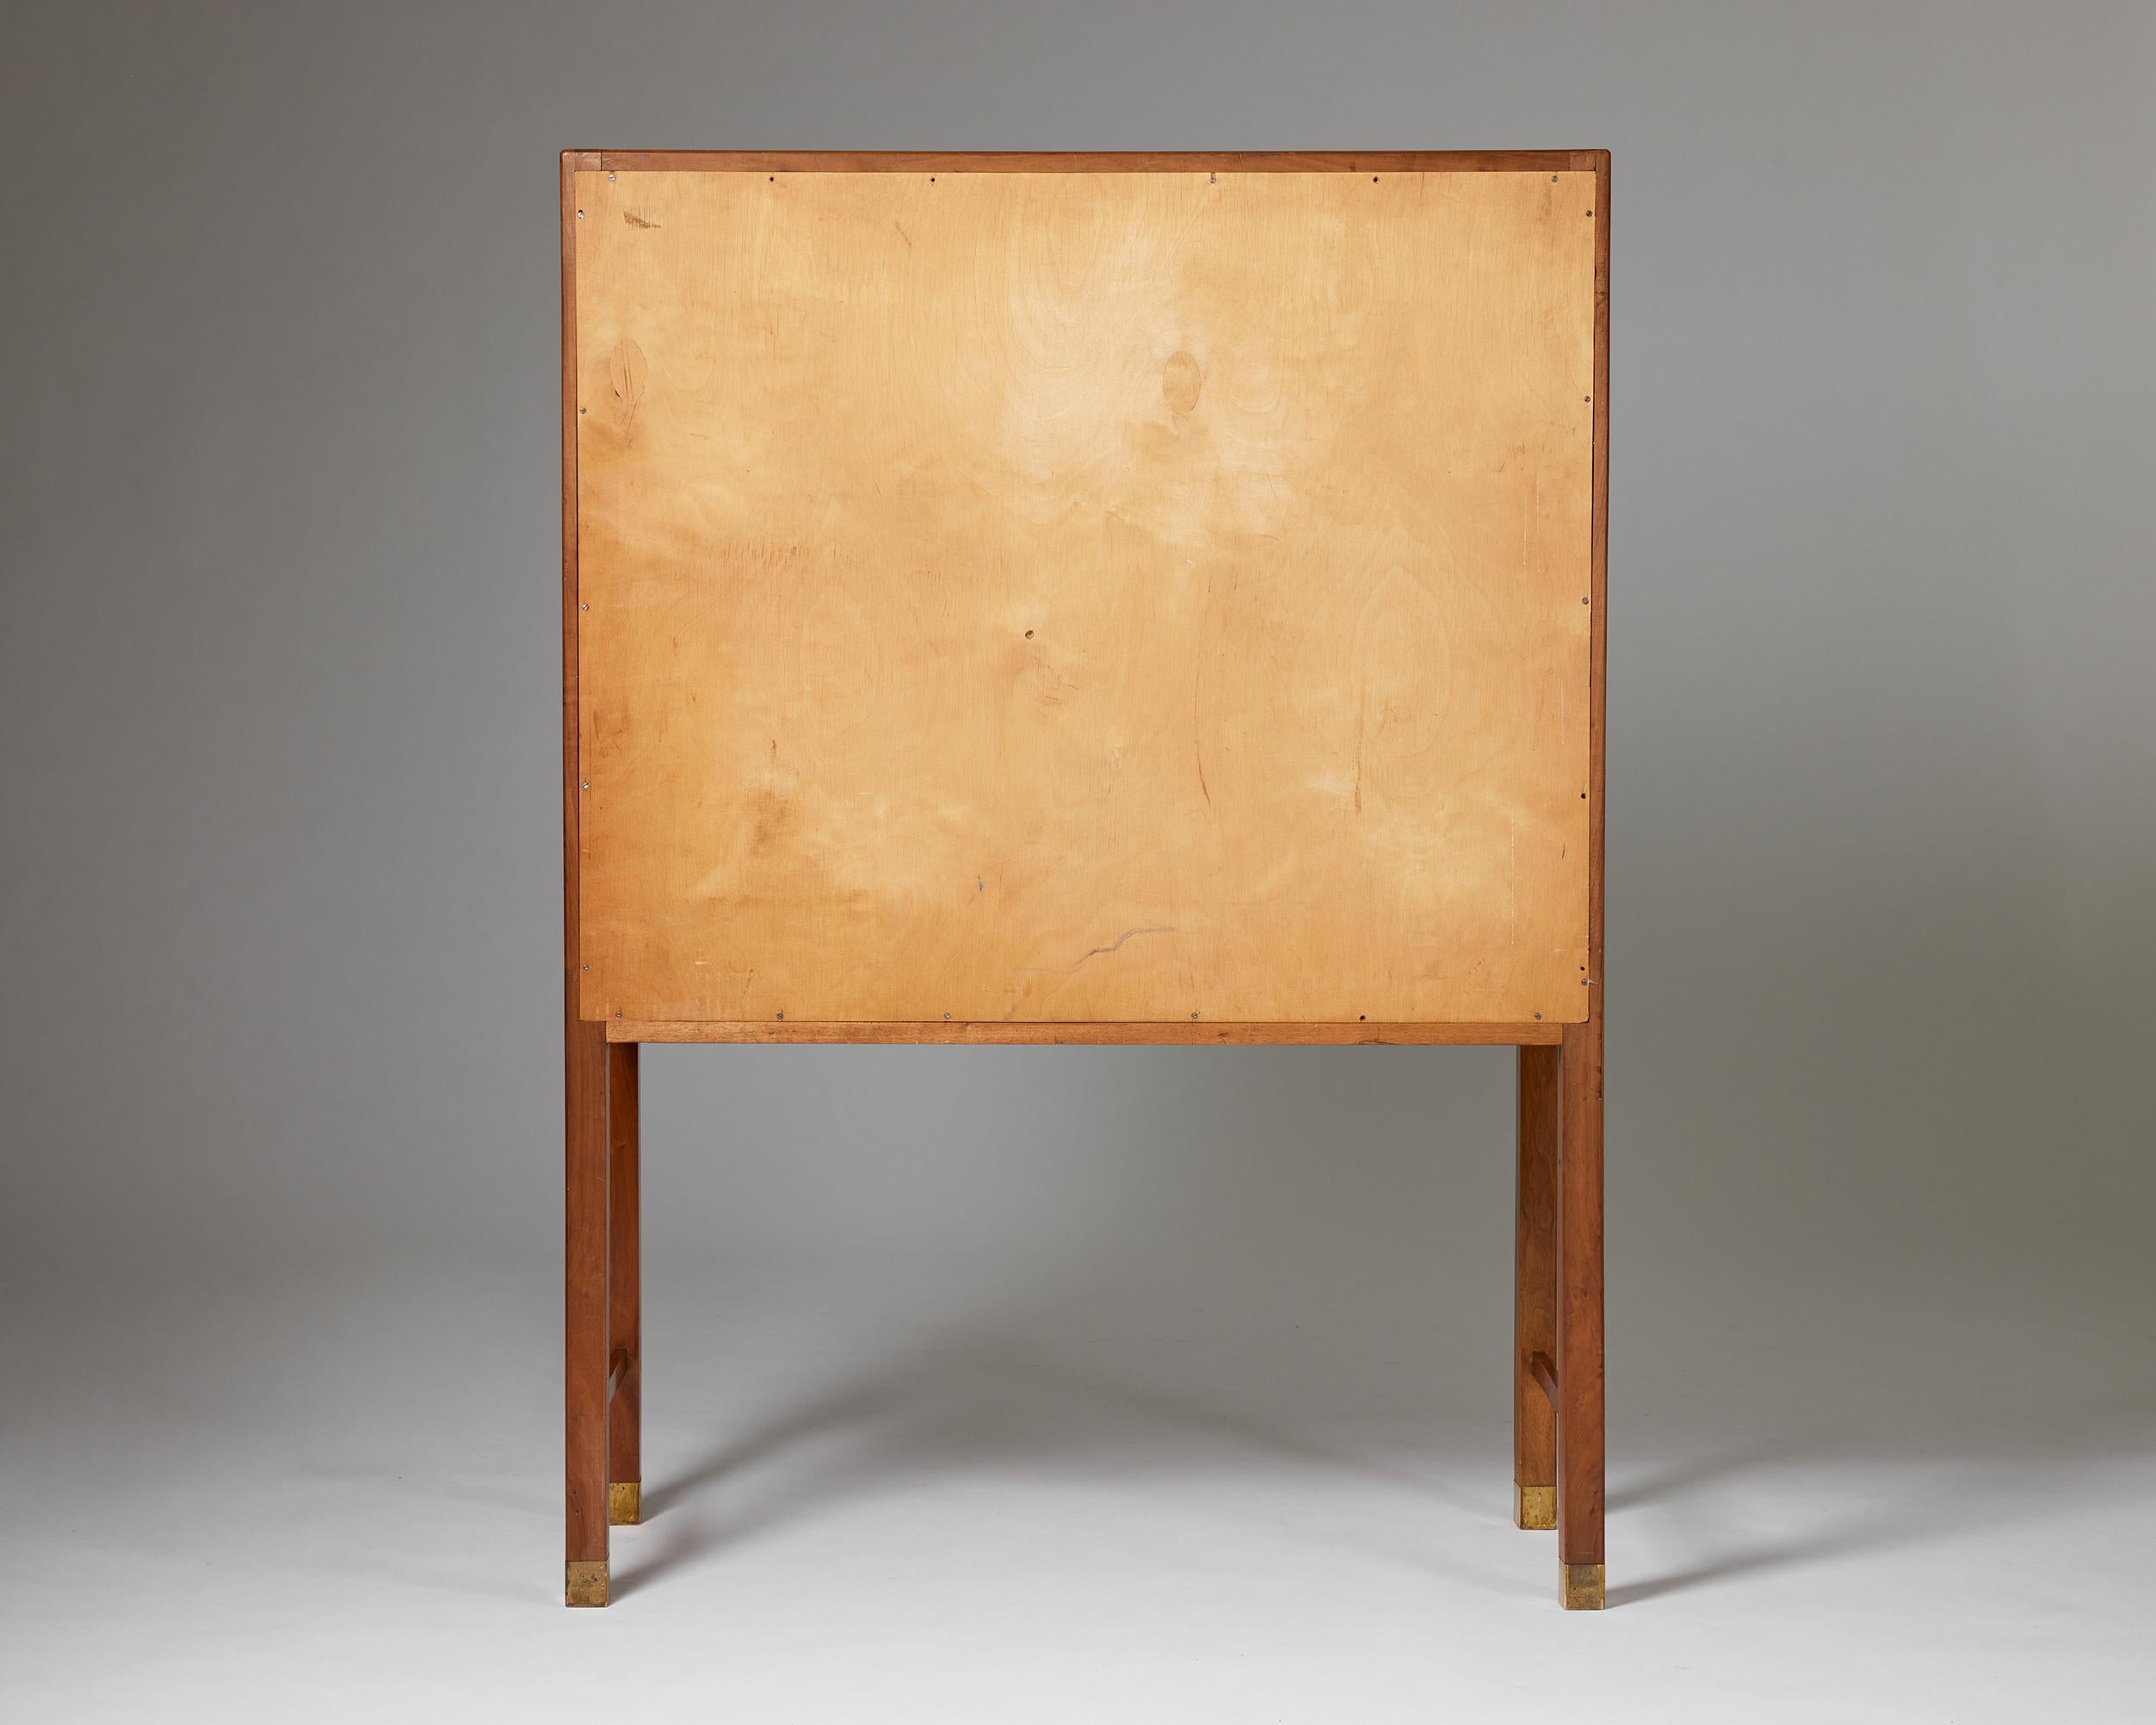 Brass Cabinet with Tambour Doors Designed by a Danish Cabinetmaker, Denmark, 1950s For Sale